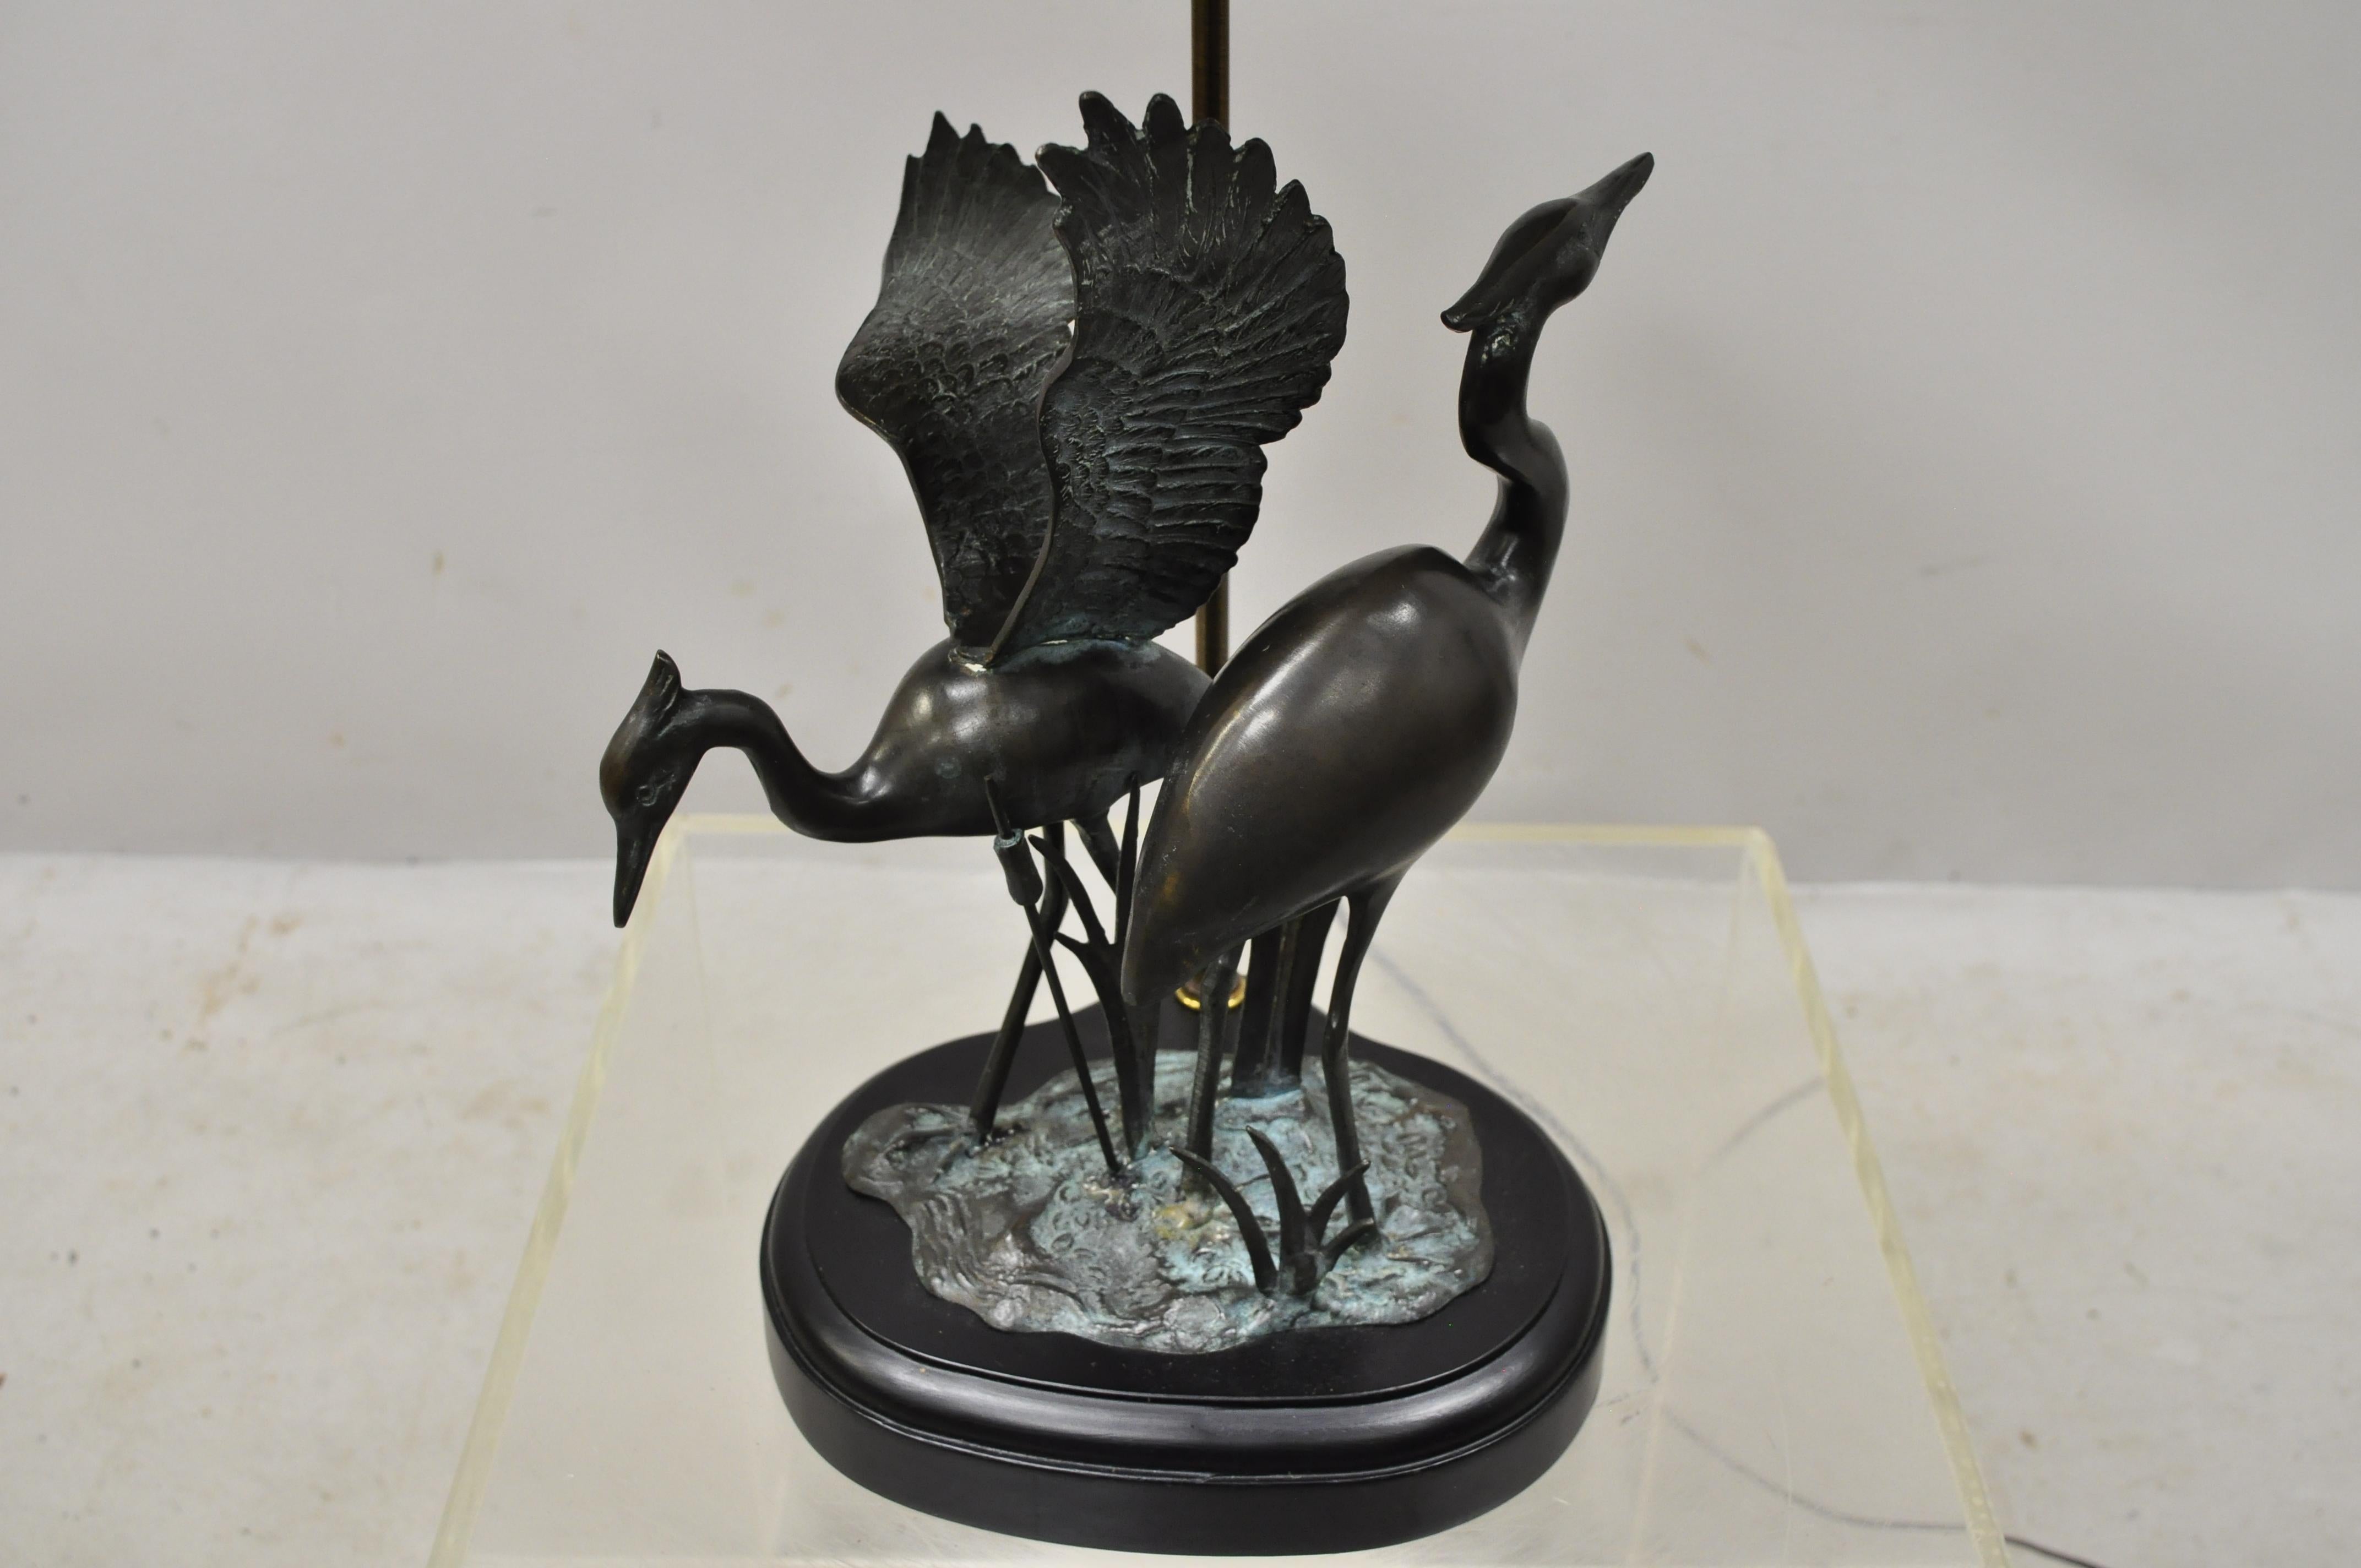 Bronze crane bird figures oriental Chinese style table lamp with black shade. Item features bronze crane figures, wooden base, original shade, quality craftsmanship, great style and form, circa late 20th-early 21st century. Measurements: 27.5